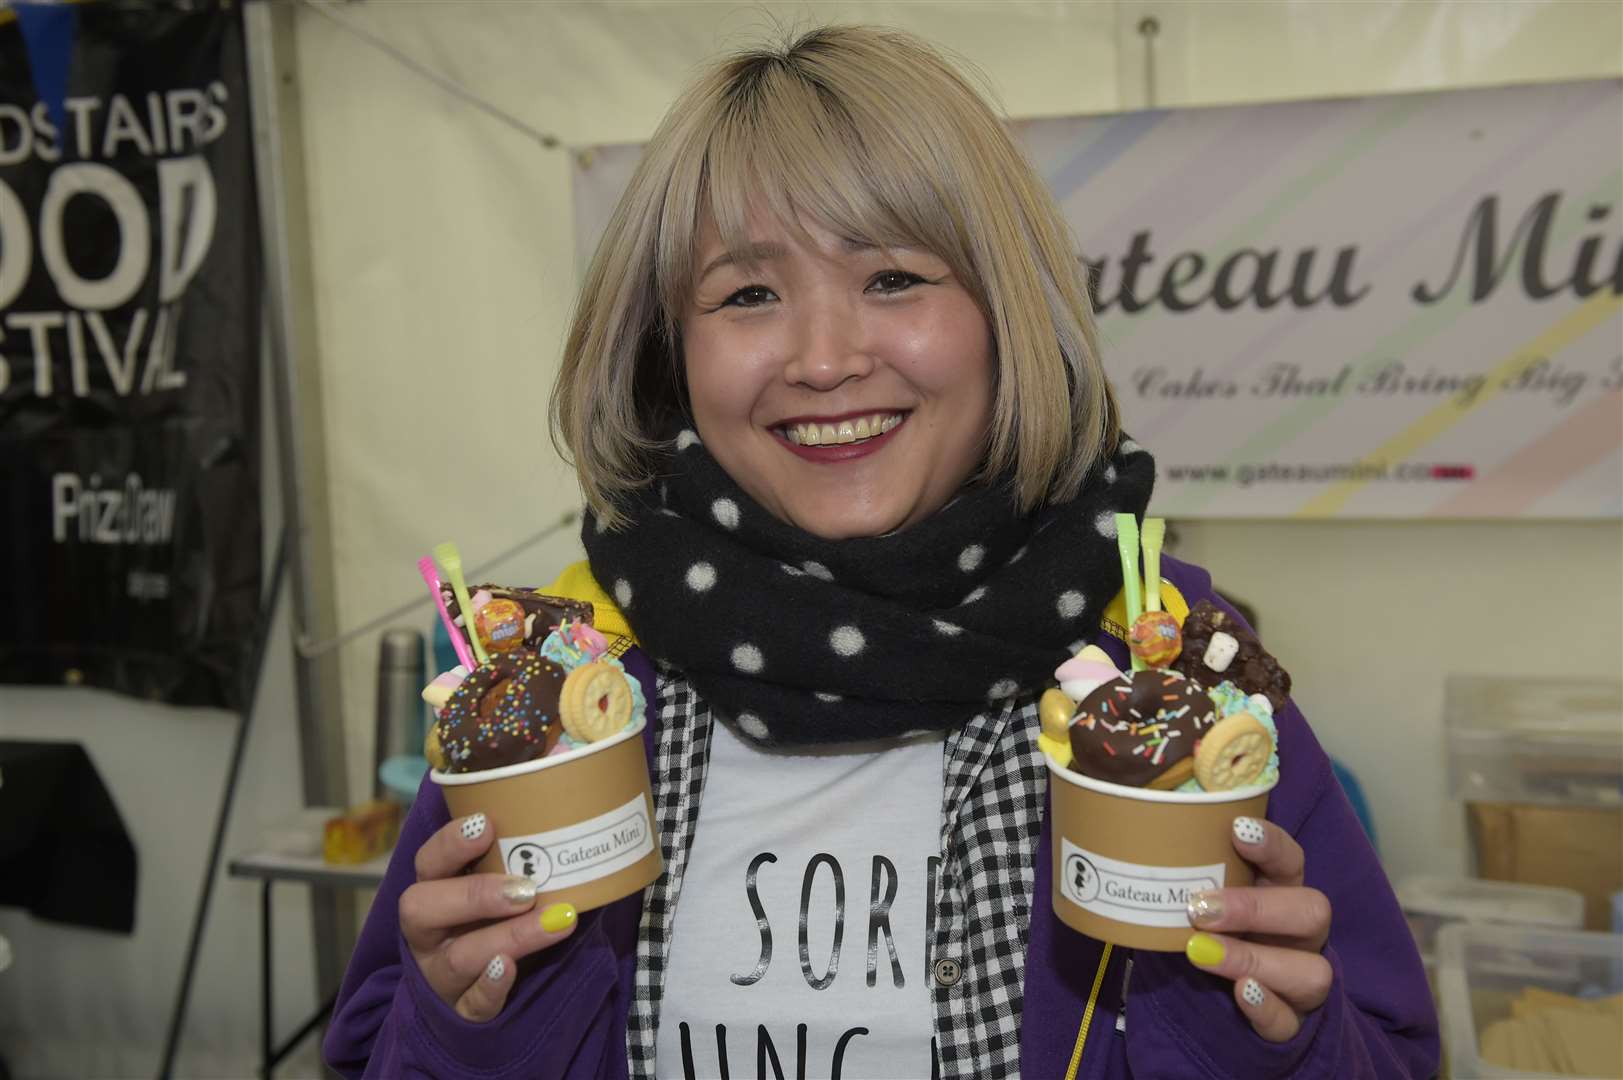 Tasty treats on offer at Broadstairs Food Festival